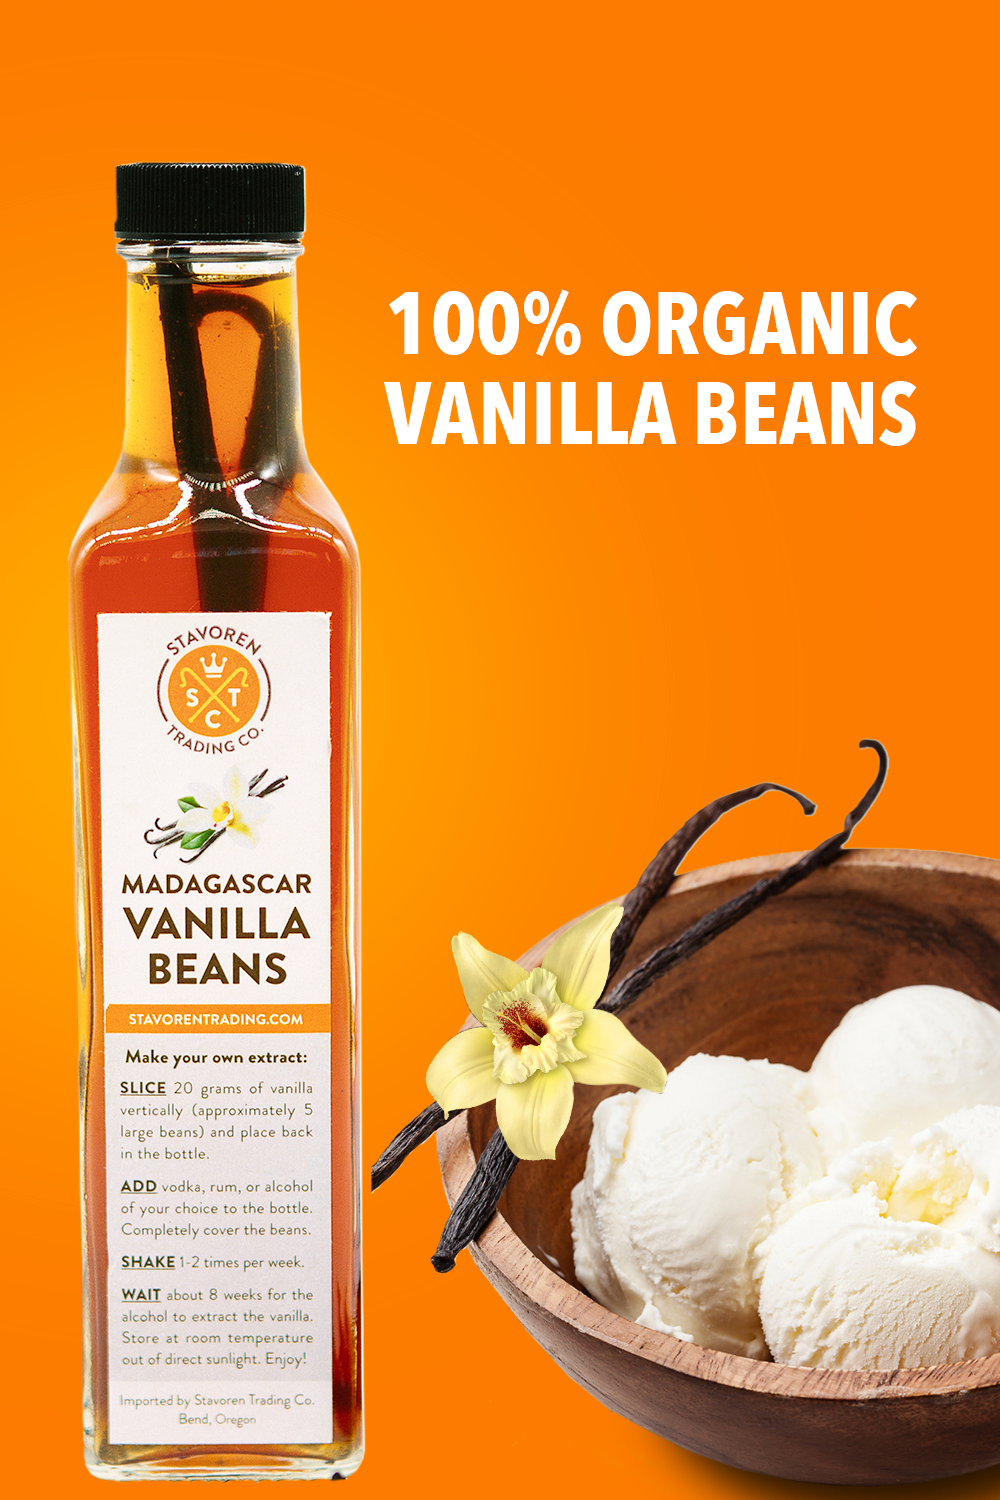 Check Out Our Vanilla Recipes